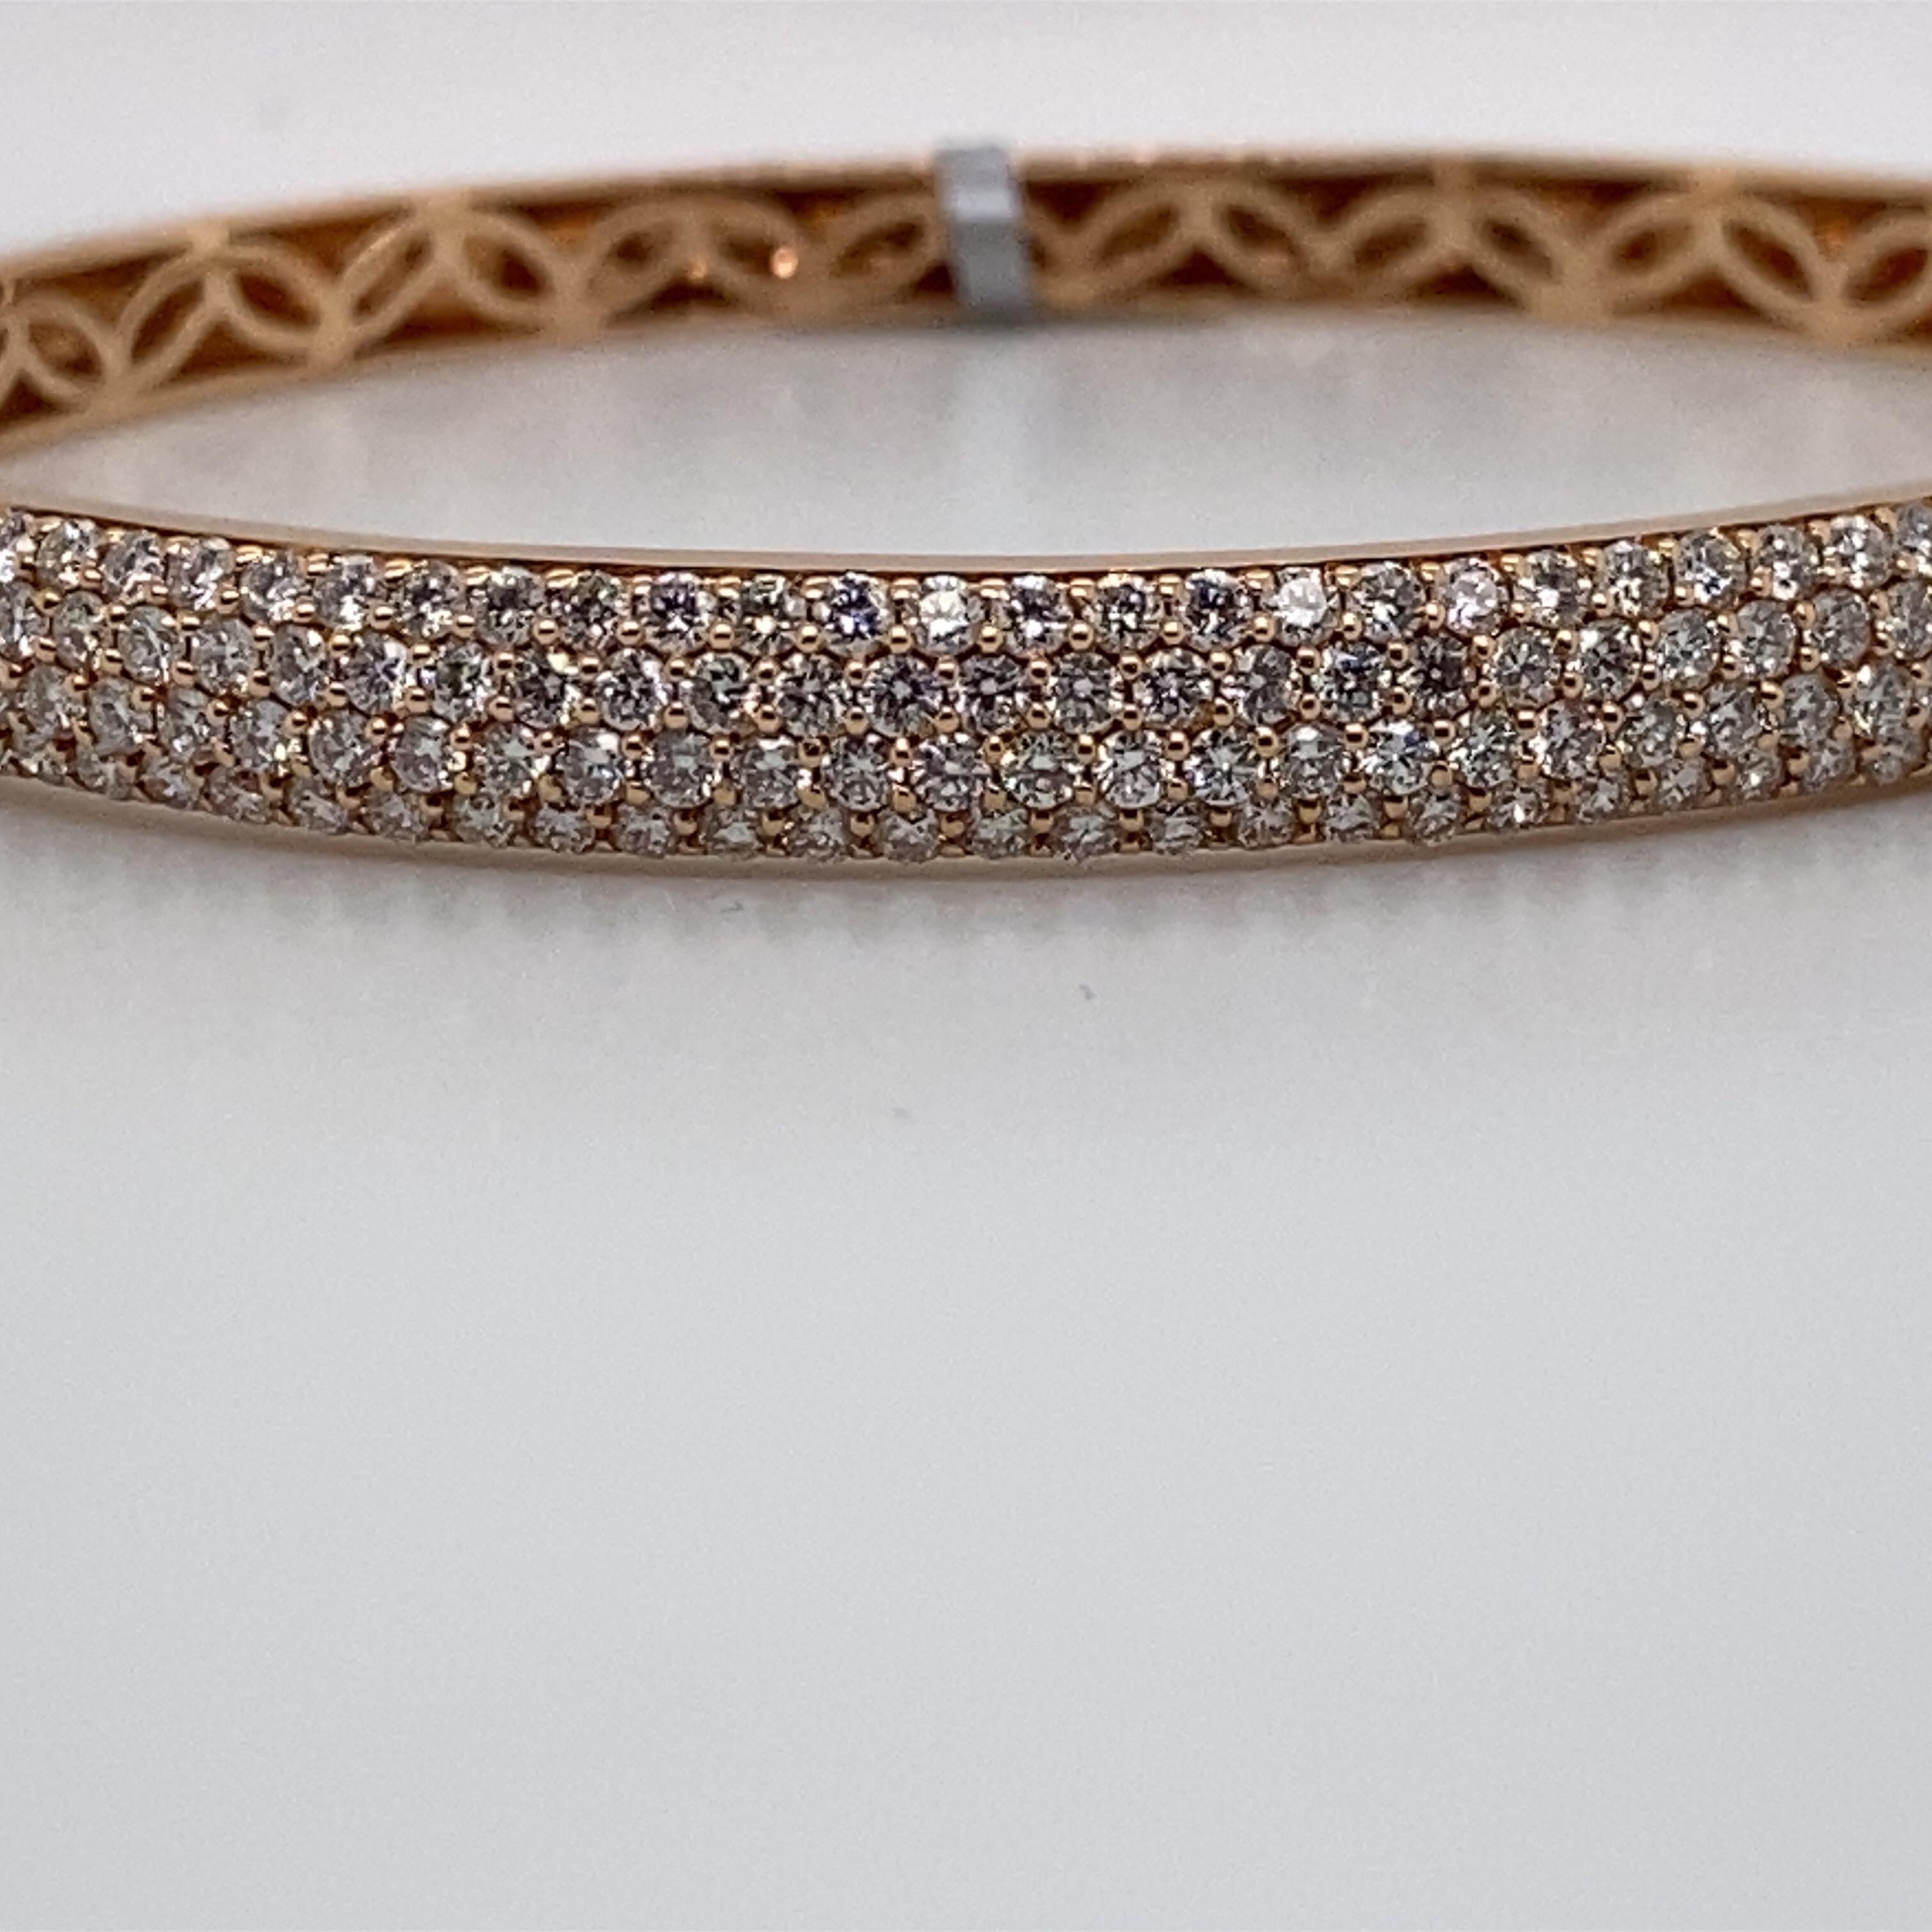 18K Rose gold bangle bracelet featuring  three rows of 172 round brilliants weighing 2.32 carats.
Color G-H
Clarity SI 

Great for stacking!
Available in yellow & white gold. 